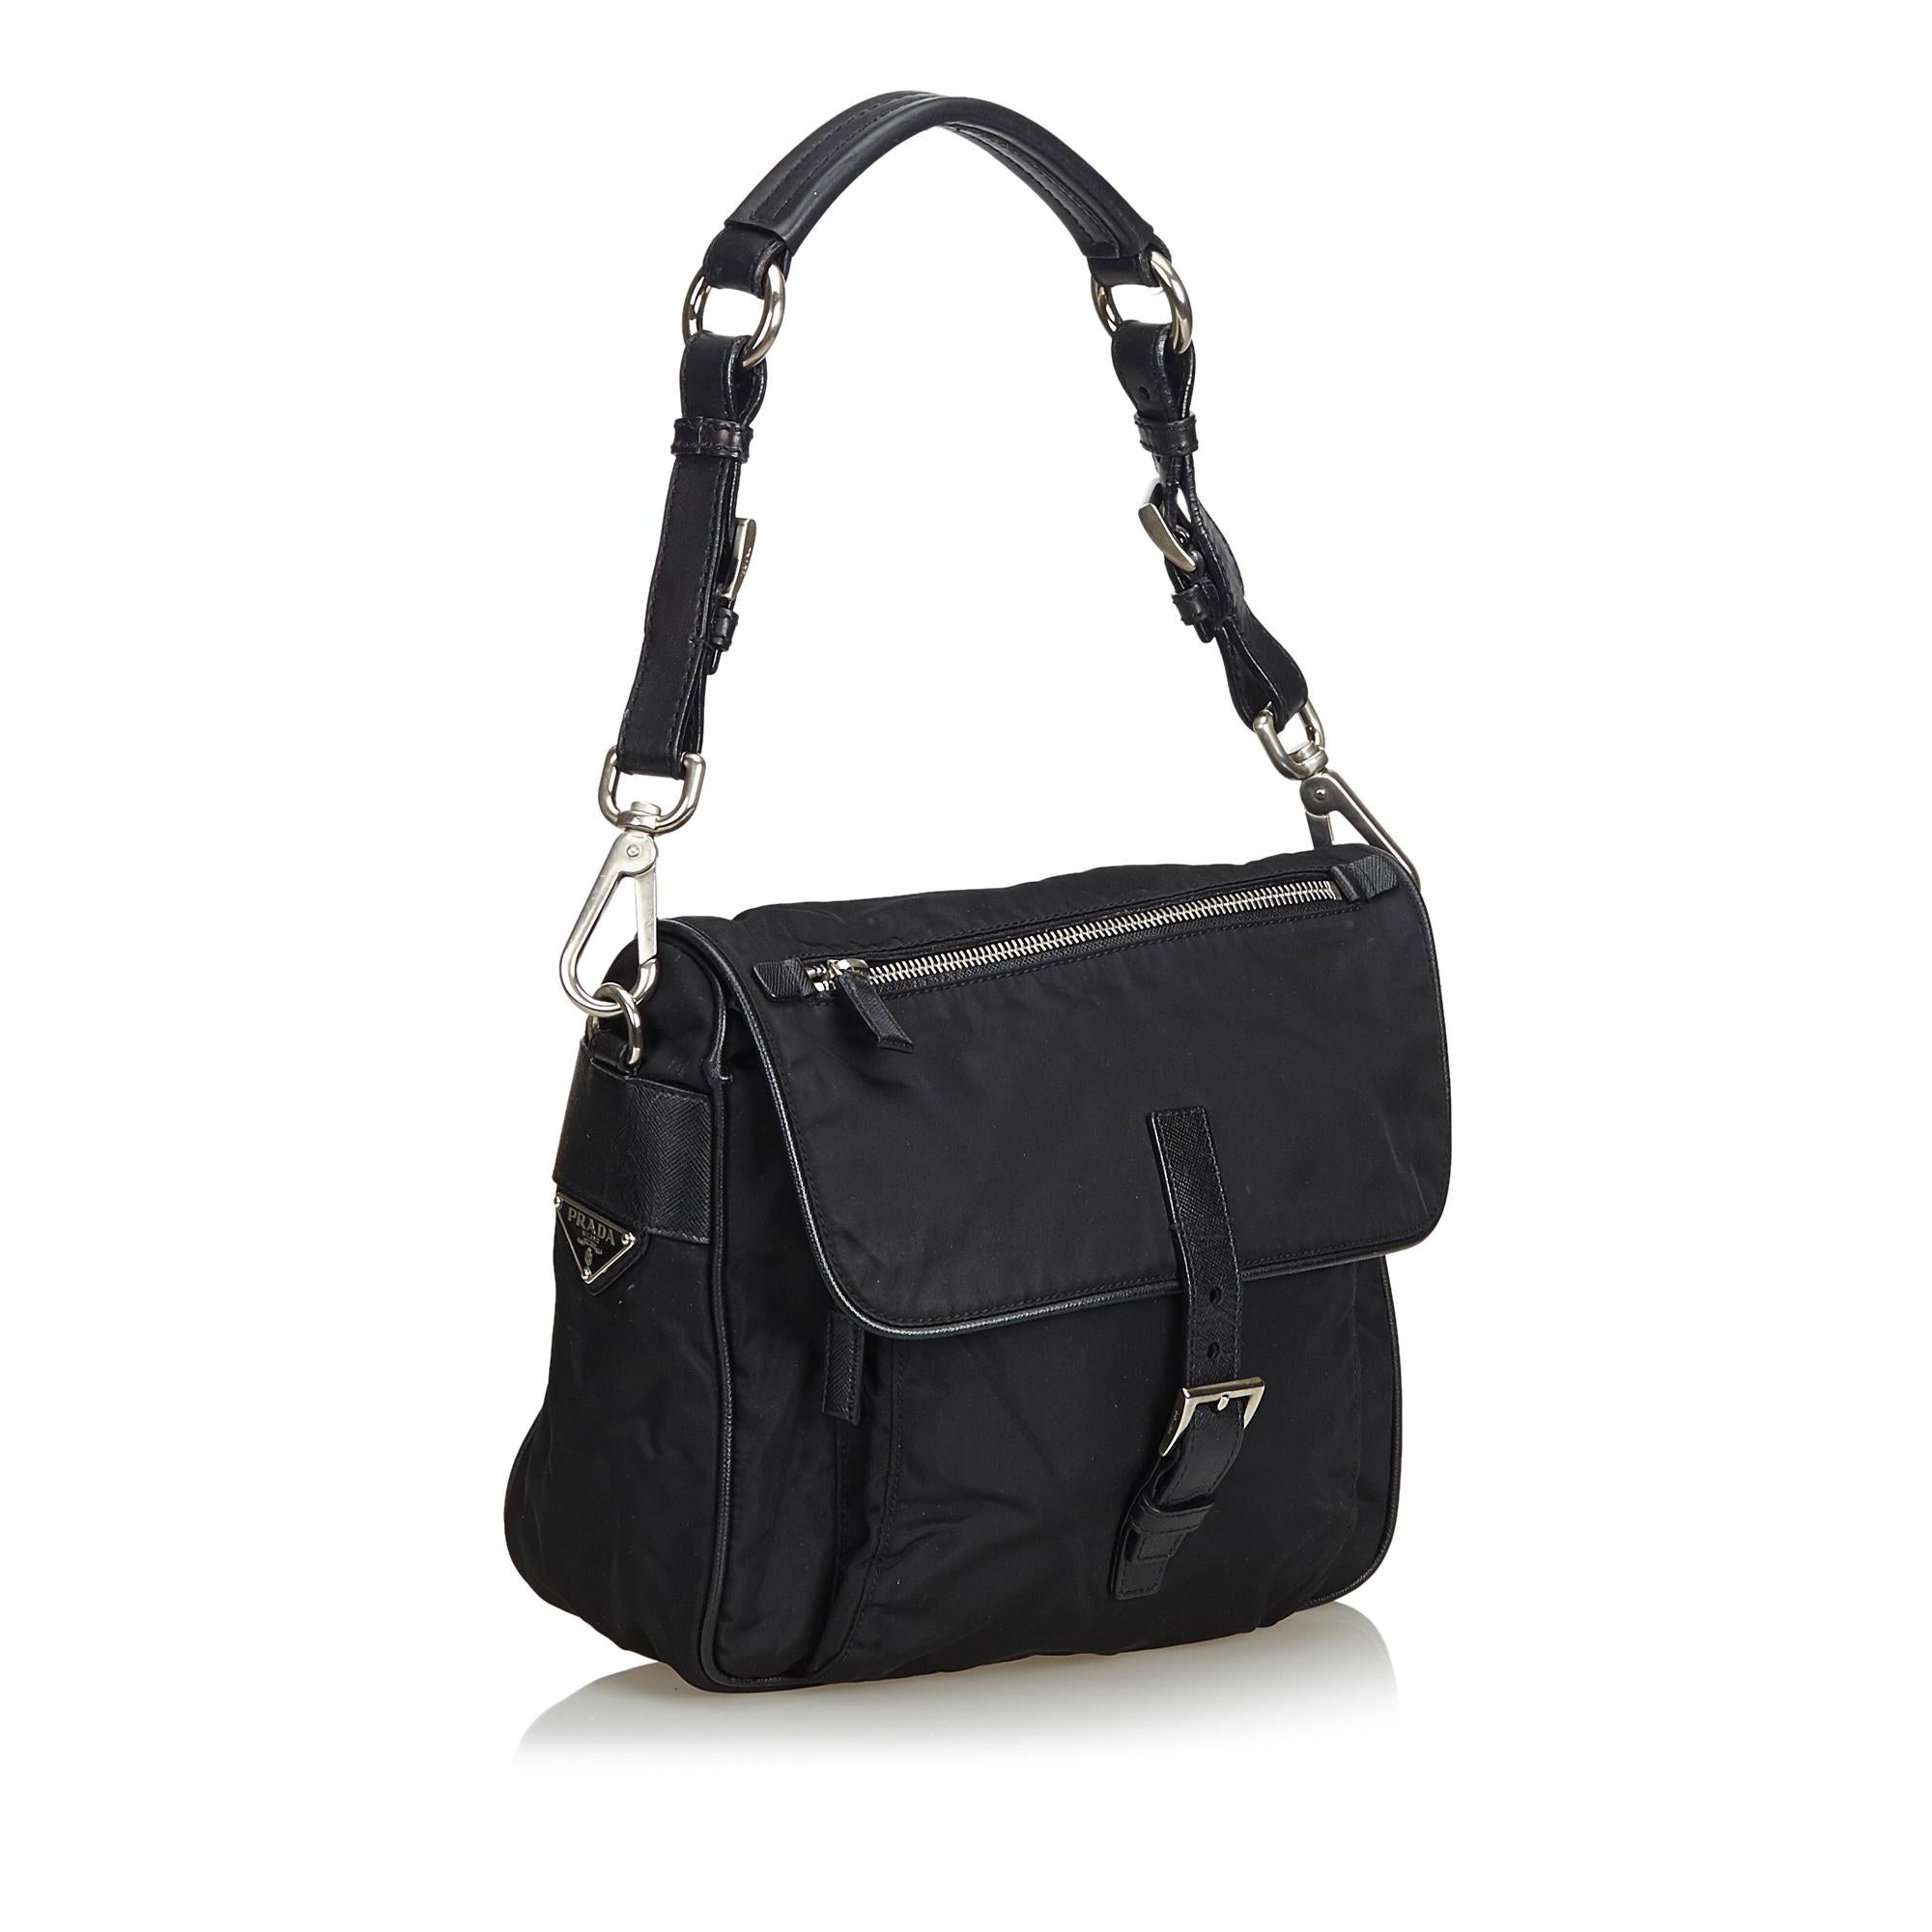 This shoulder bag features a nylon body, front exterior zip pocket, a flat leather strap, and an interior zip pocket. It carries as B+ condition rating.

Inclusions: 
Dust Bag
Authenticity Card

Dimensions:
Length: 20.00 cm
Width: 23.00 cm
Depth: